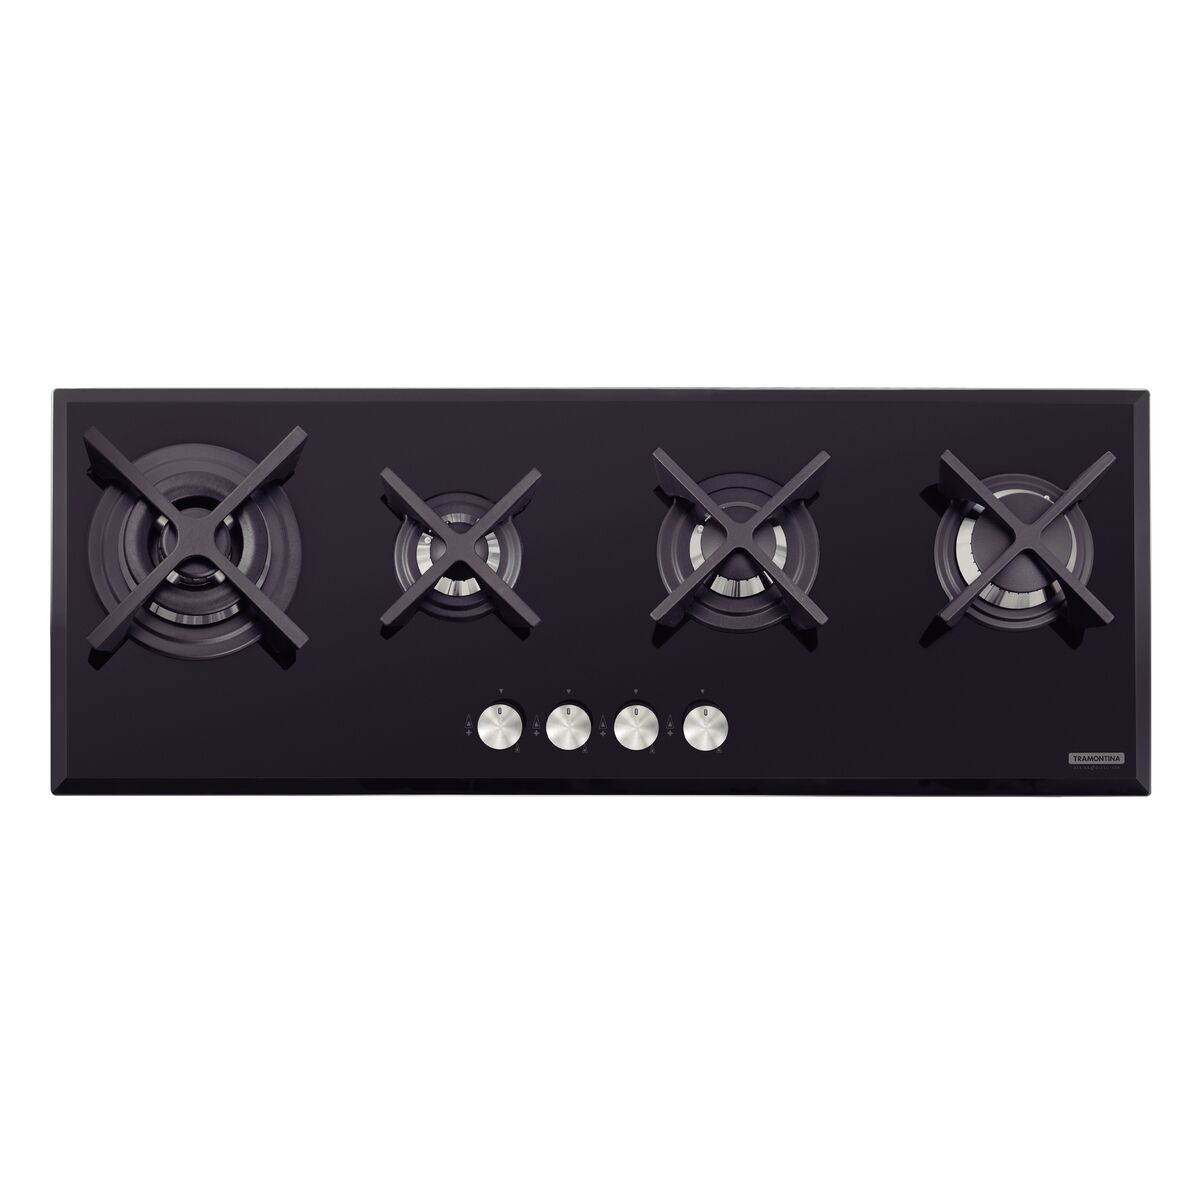 Tramontina Design Collection Slim Glass Flat tempered glass gas cooktop with cast iron trivets, auto spark and 4 burners